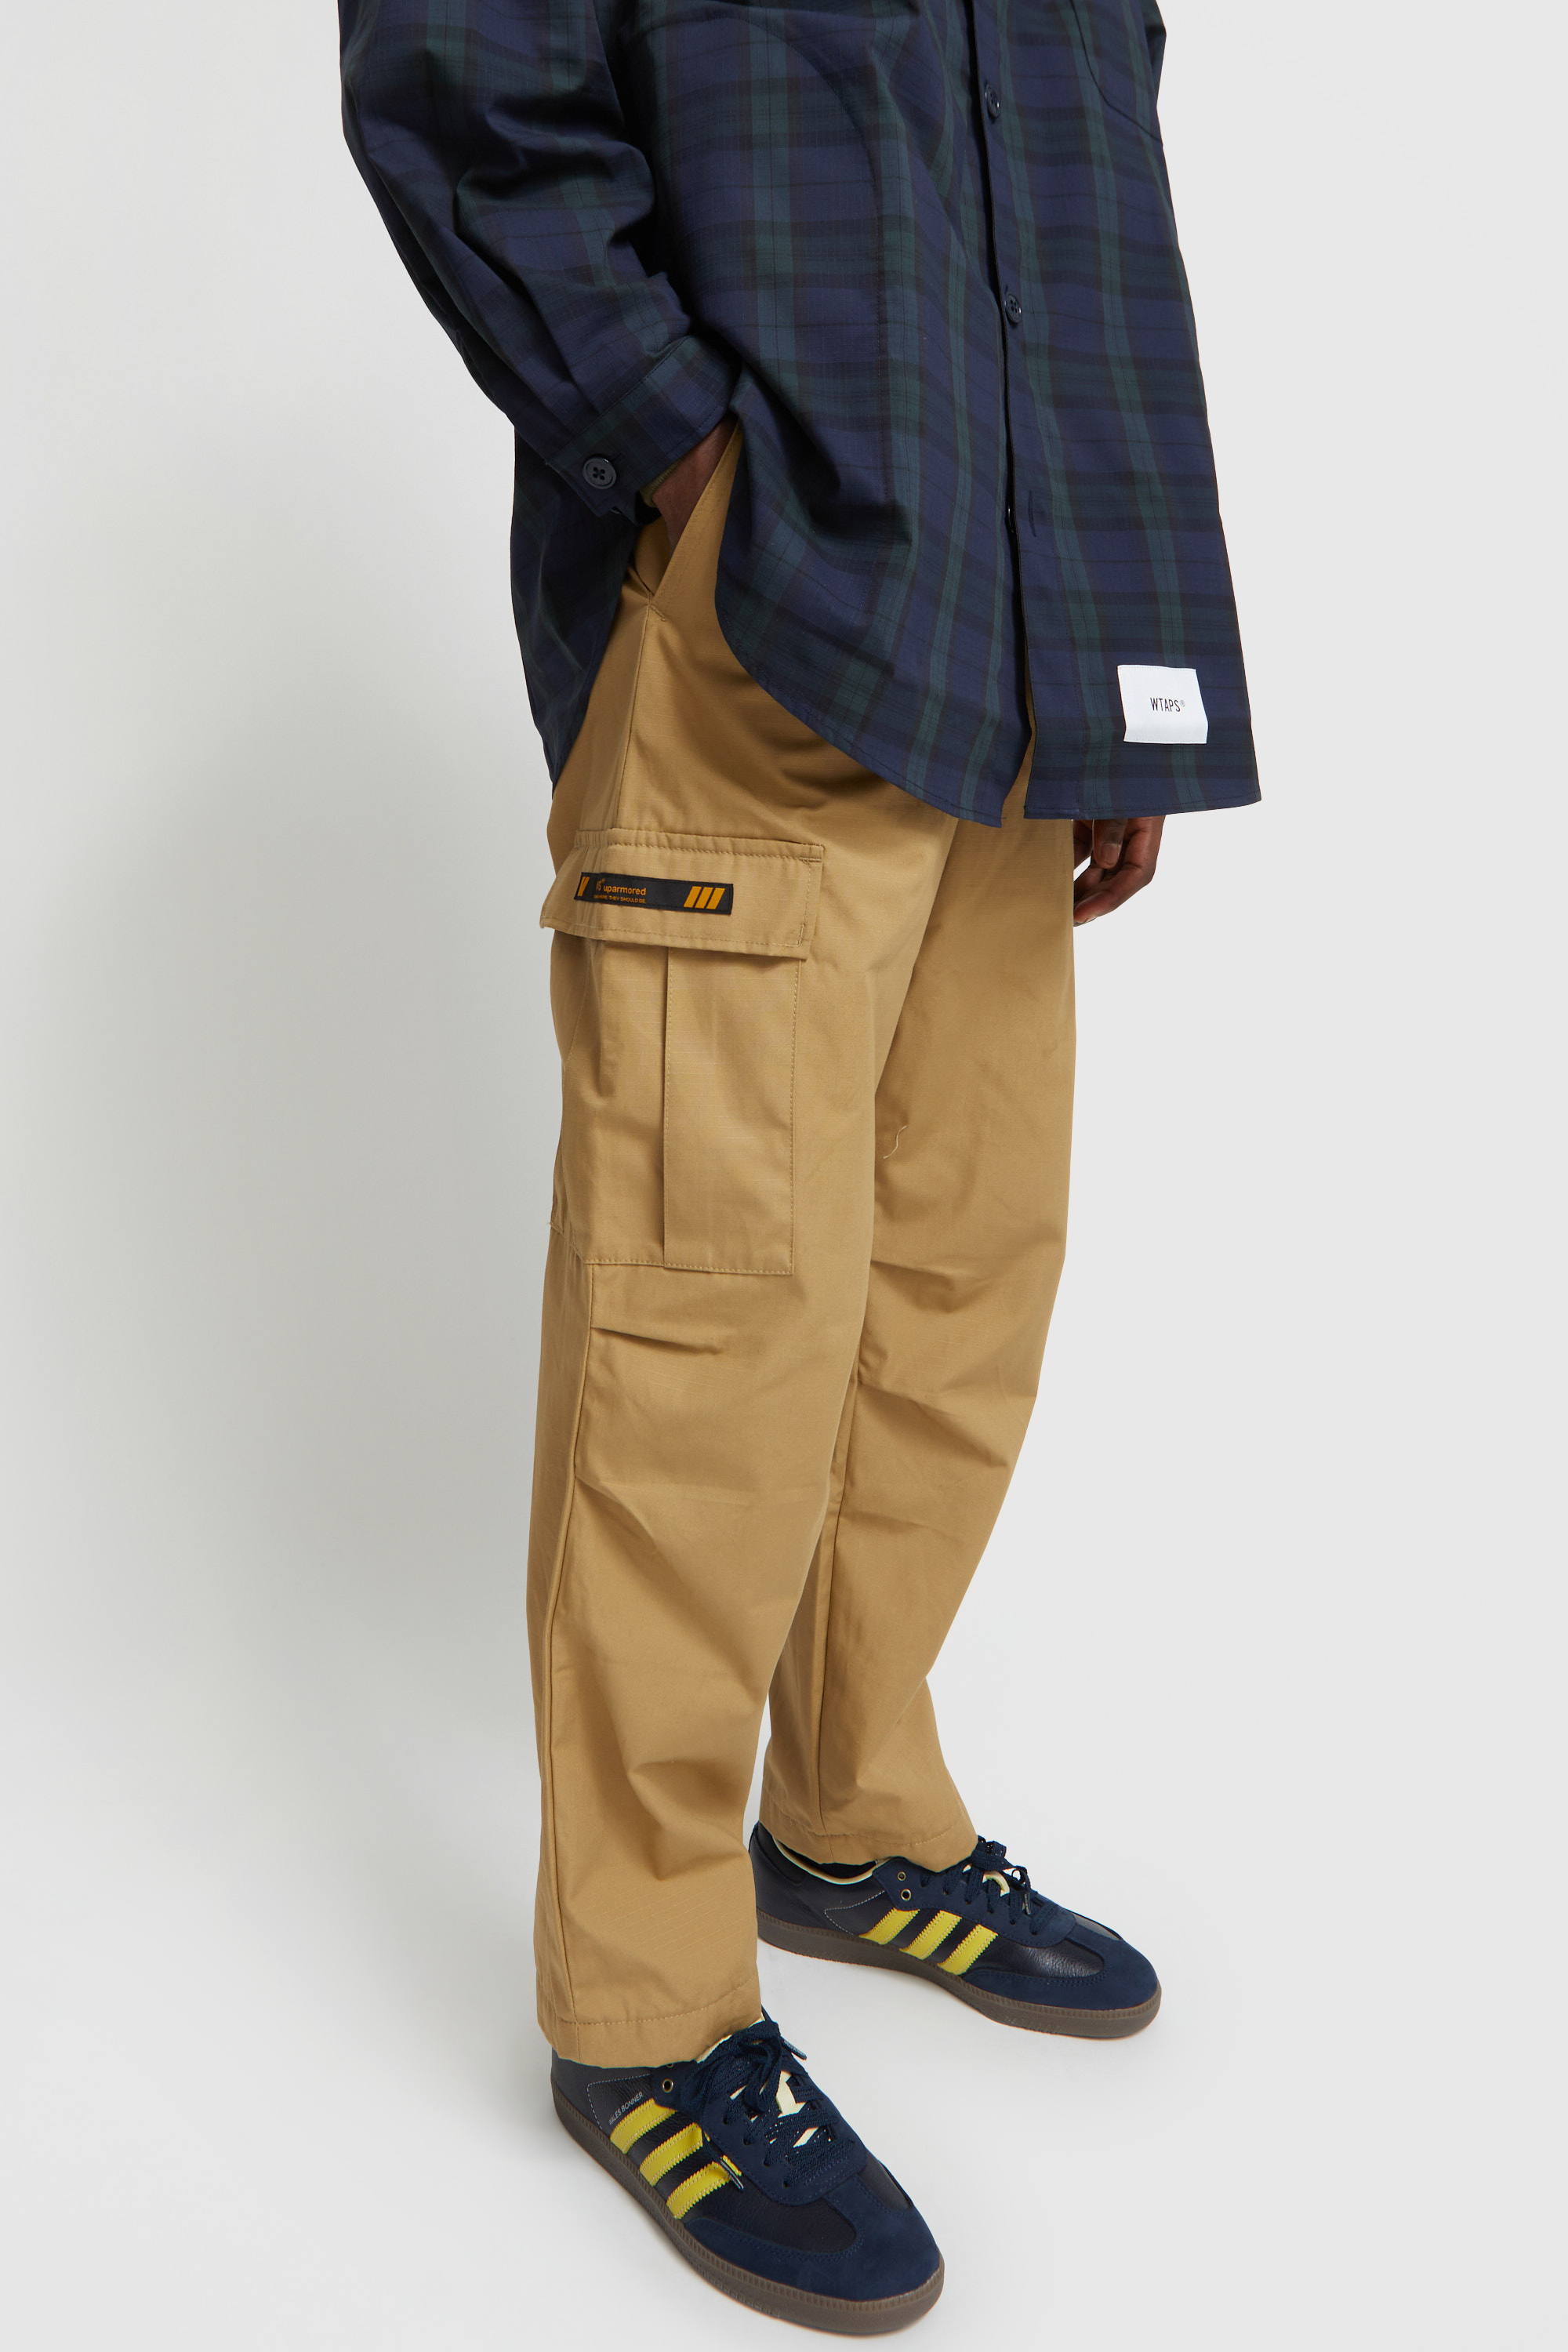 WTAPS 22AW JUNGLE STOCK / TROUSERS BLK L